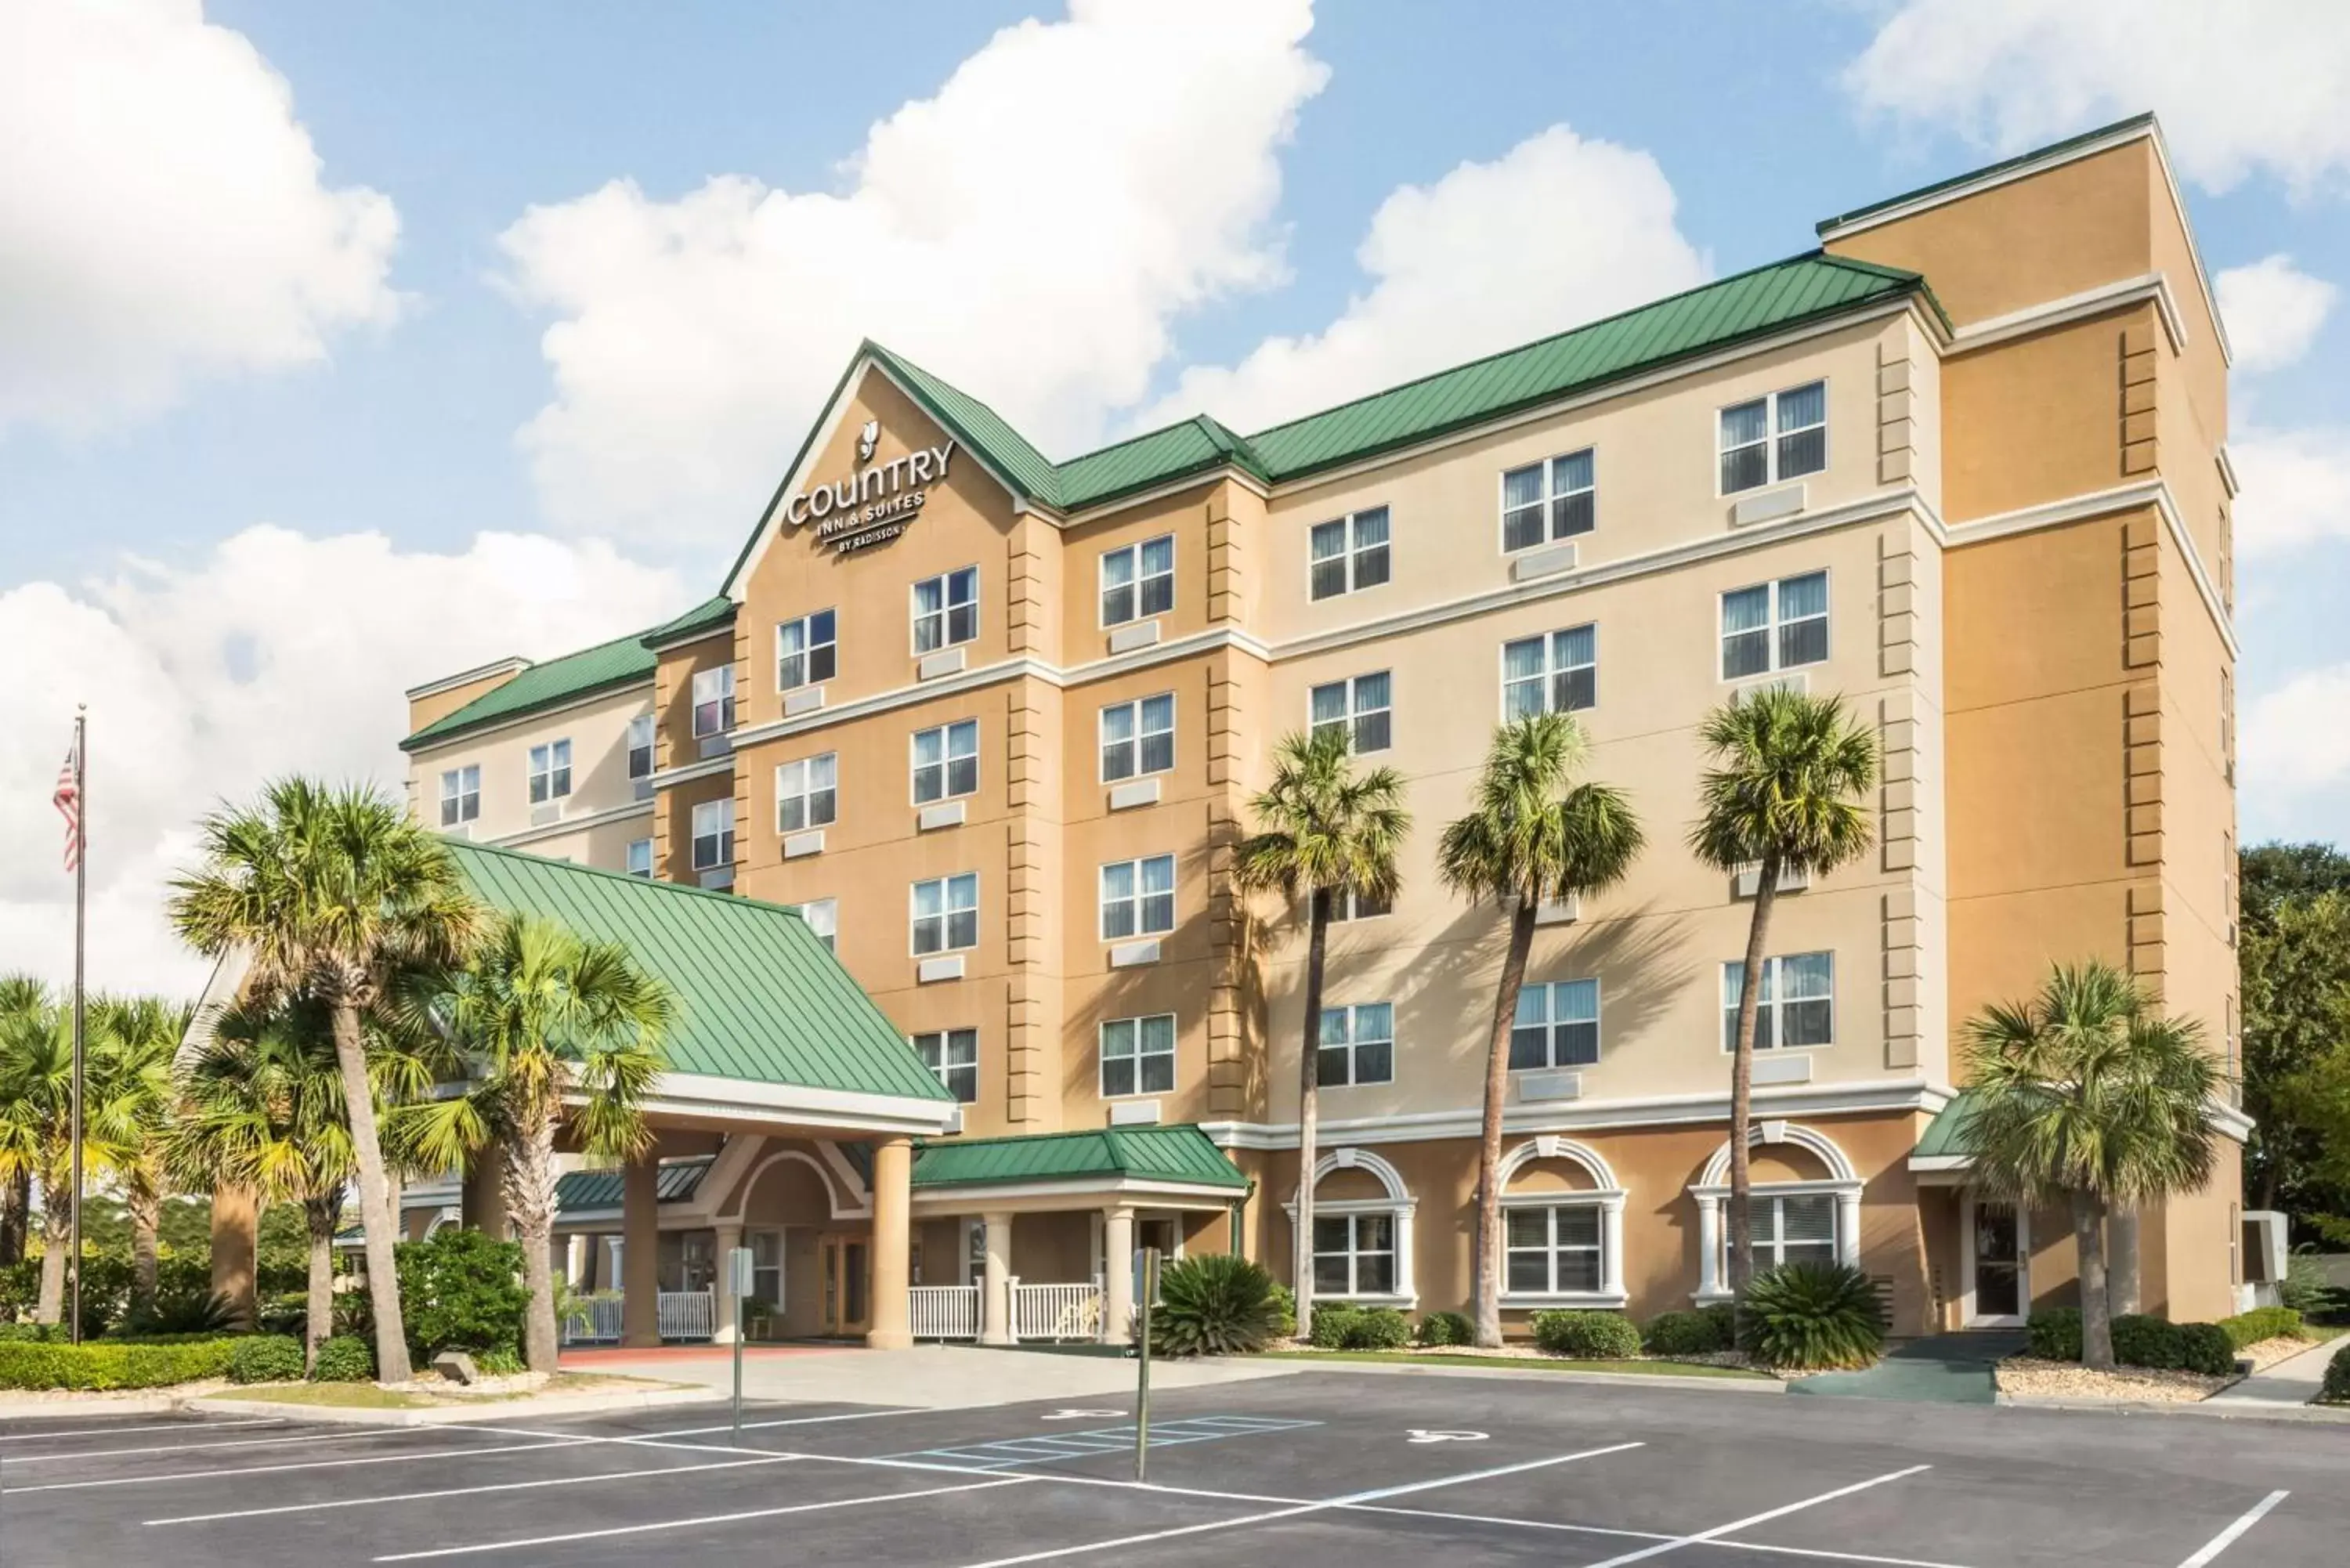 Property Building in Country Inn & Suites by Radisson, Valdosta, GA - NEWLY RENOVATED